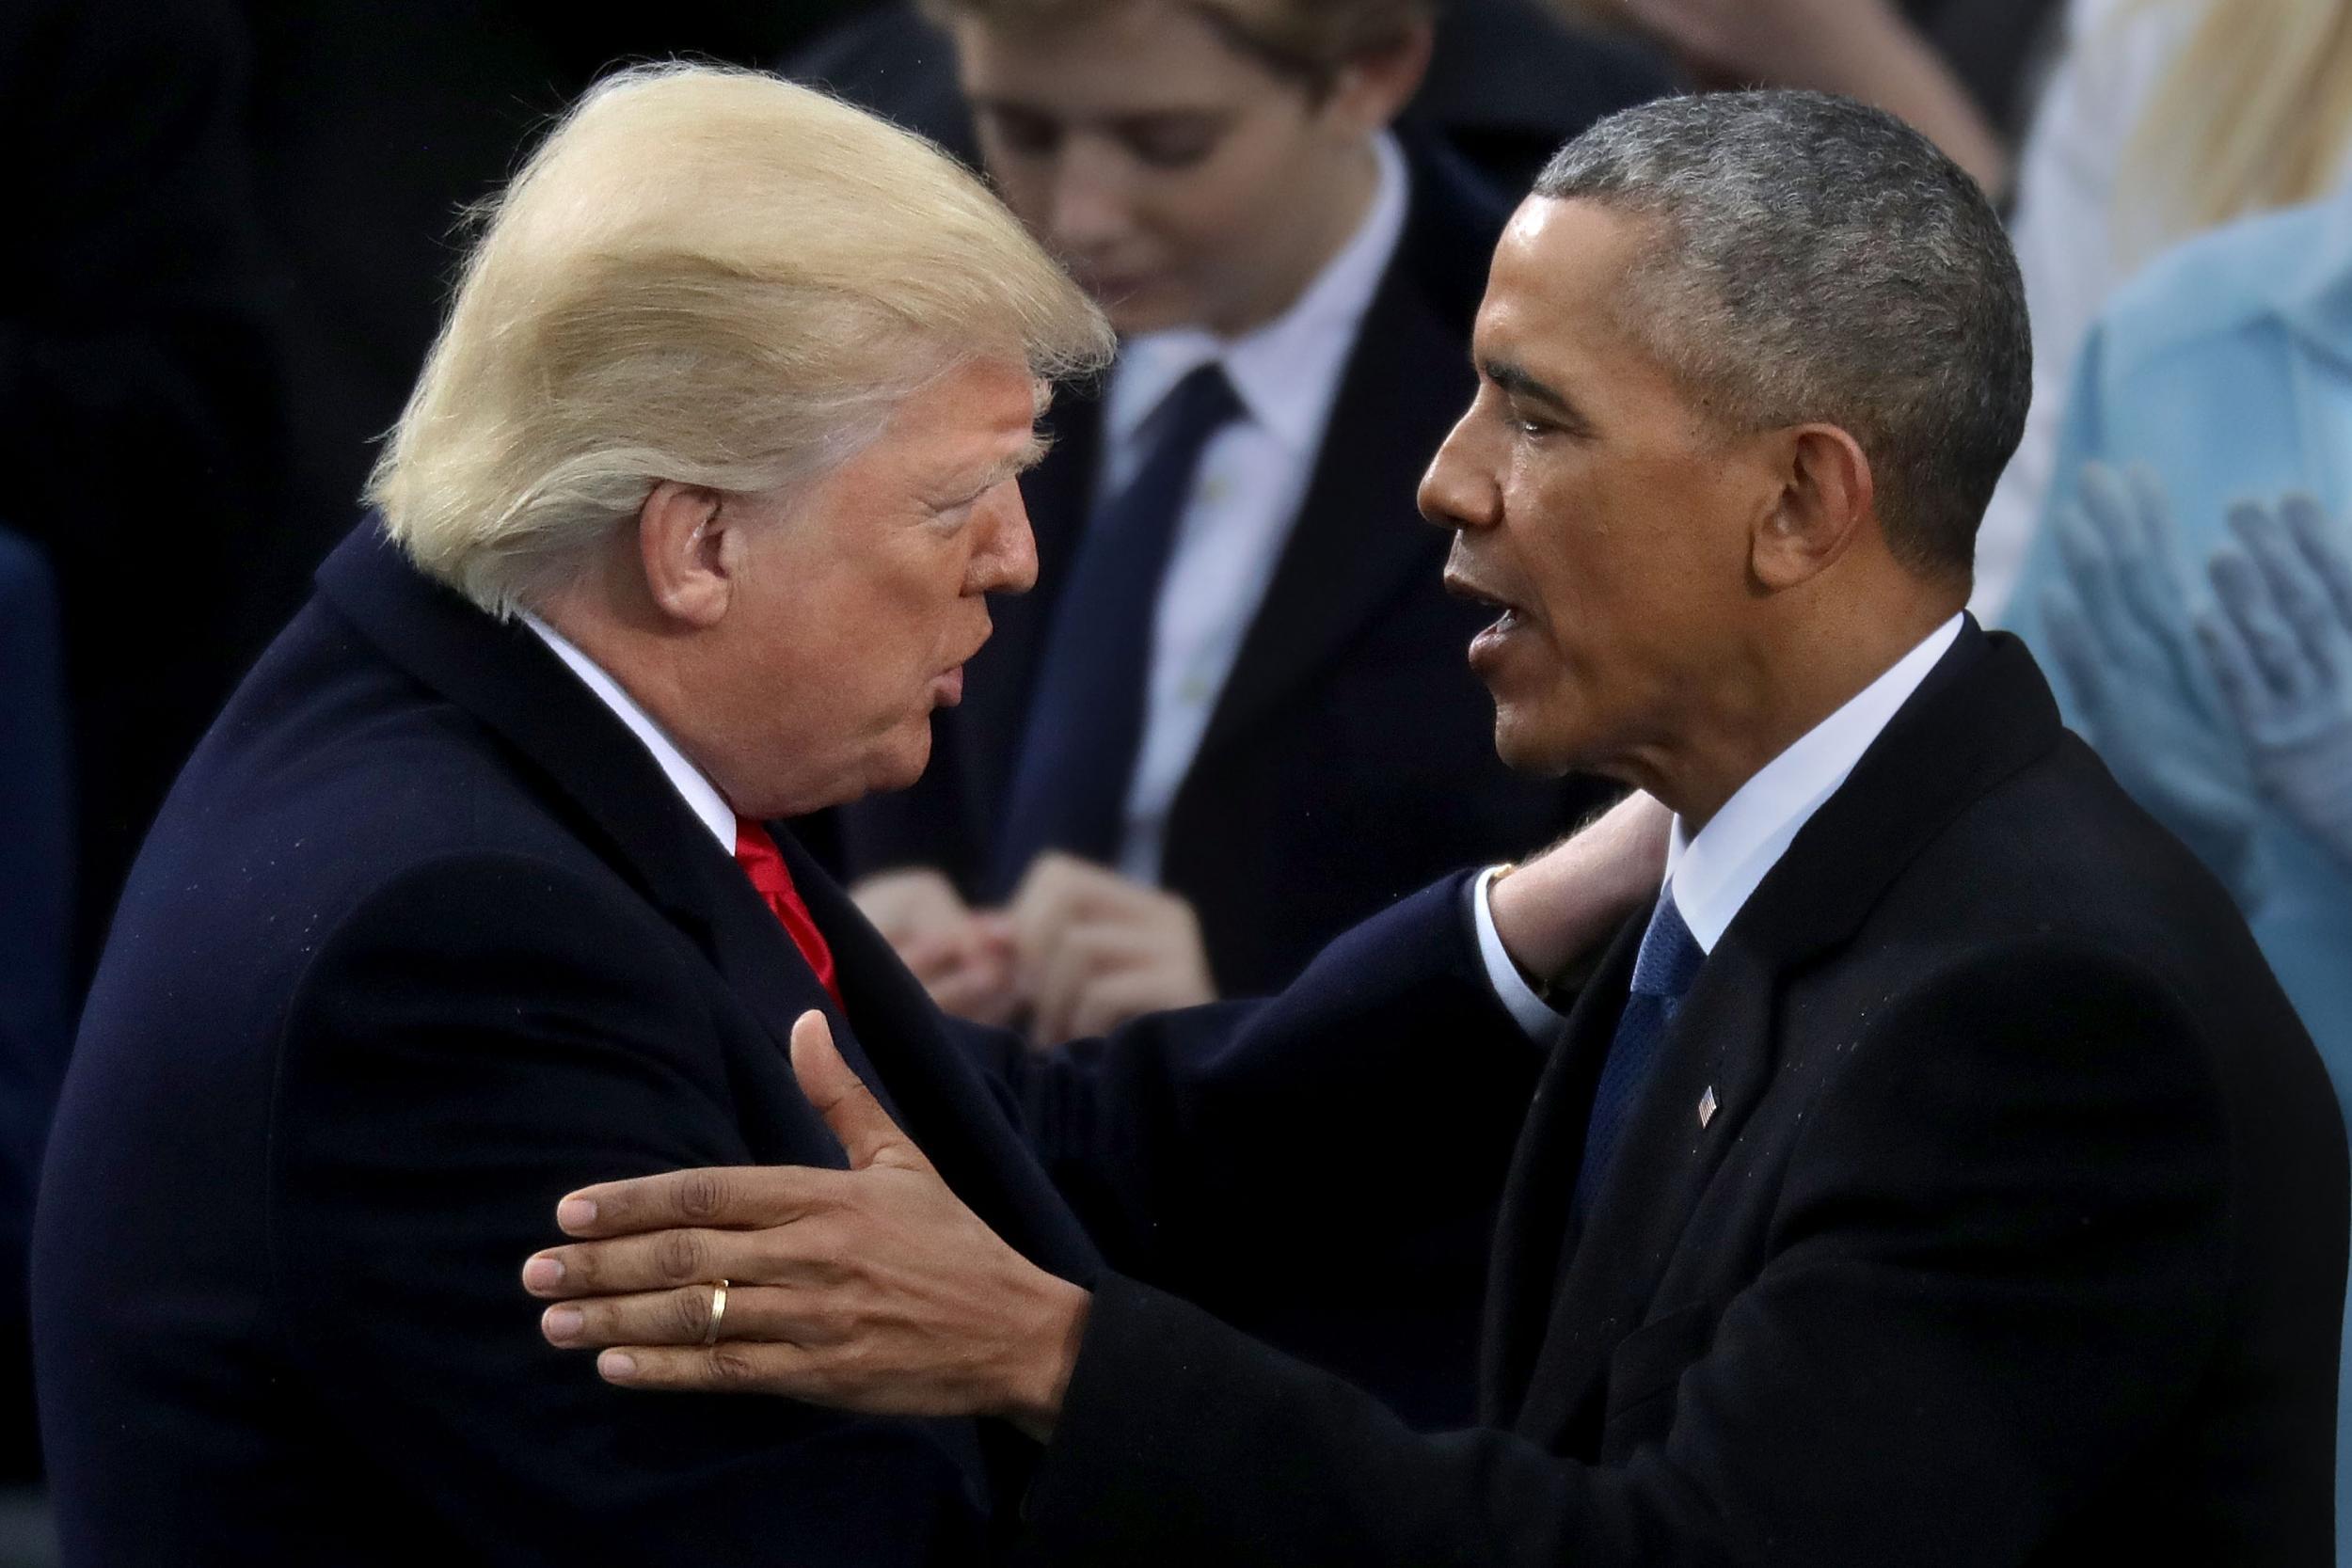 Barack Obama congratulates Donald Trump as the latter takes the oath of office in January